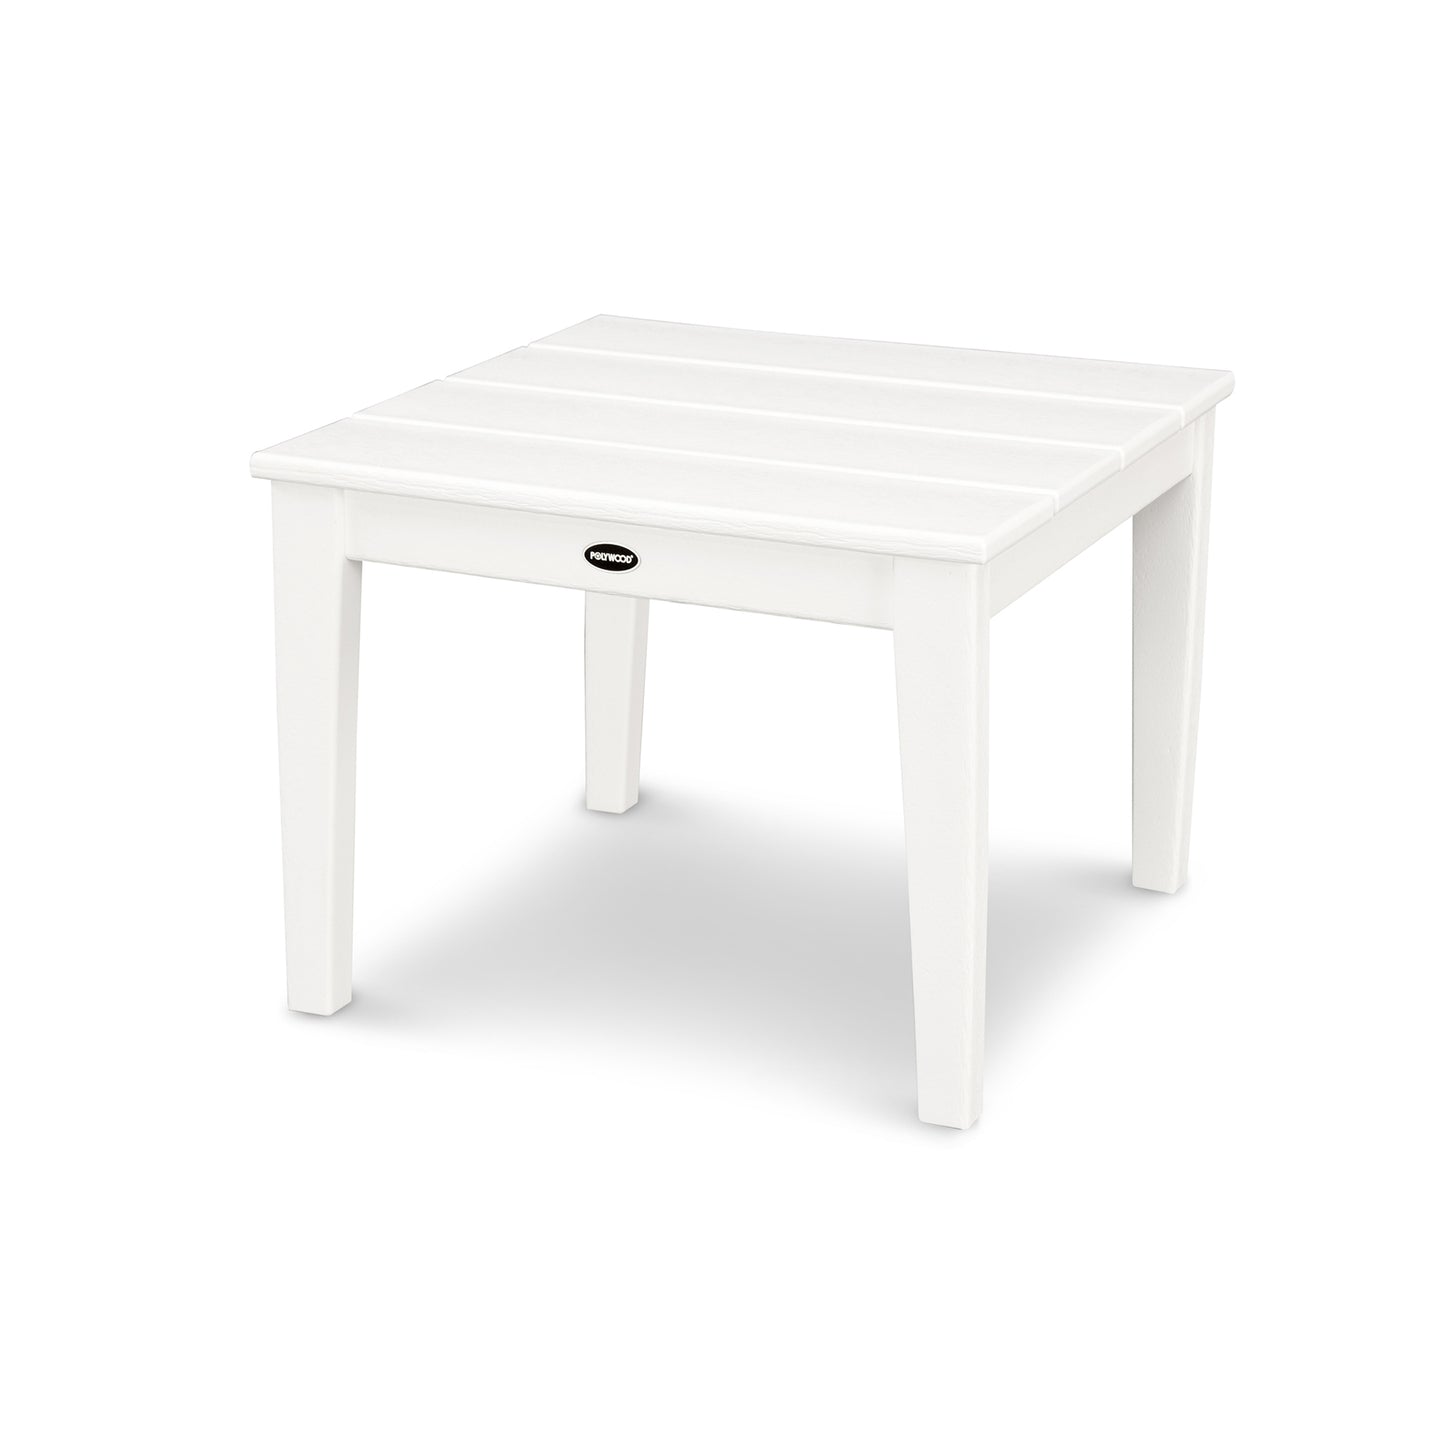 A white, square POLYWOOD Newport 22" end table with a smooth top and sturdy legs, isolated on a white background with a visible brand logo on one side.